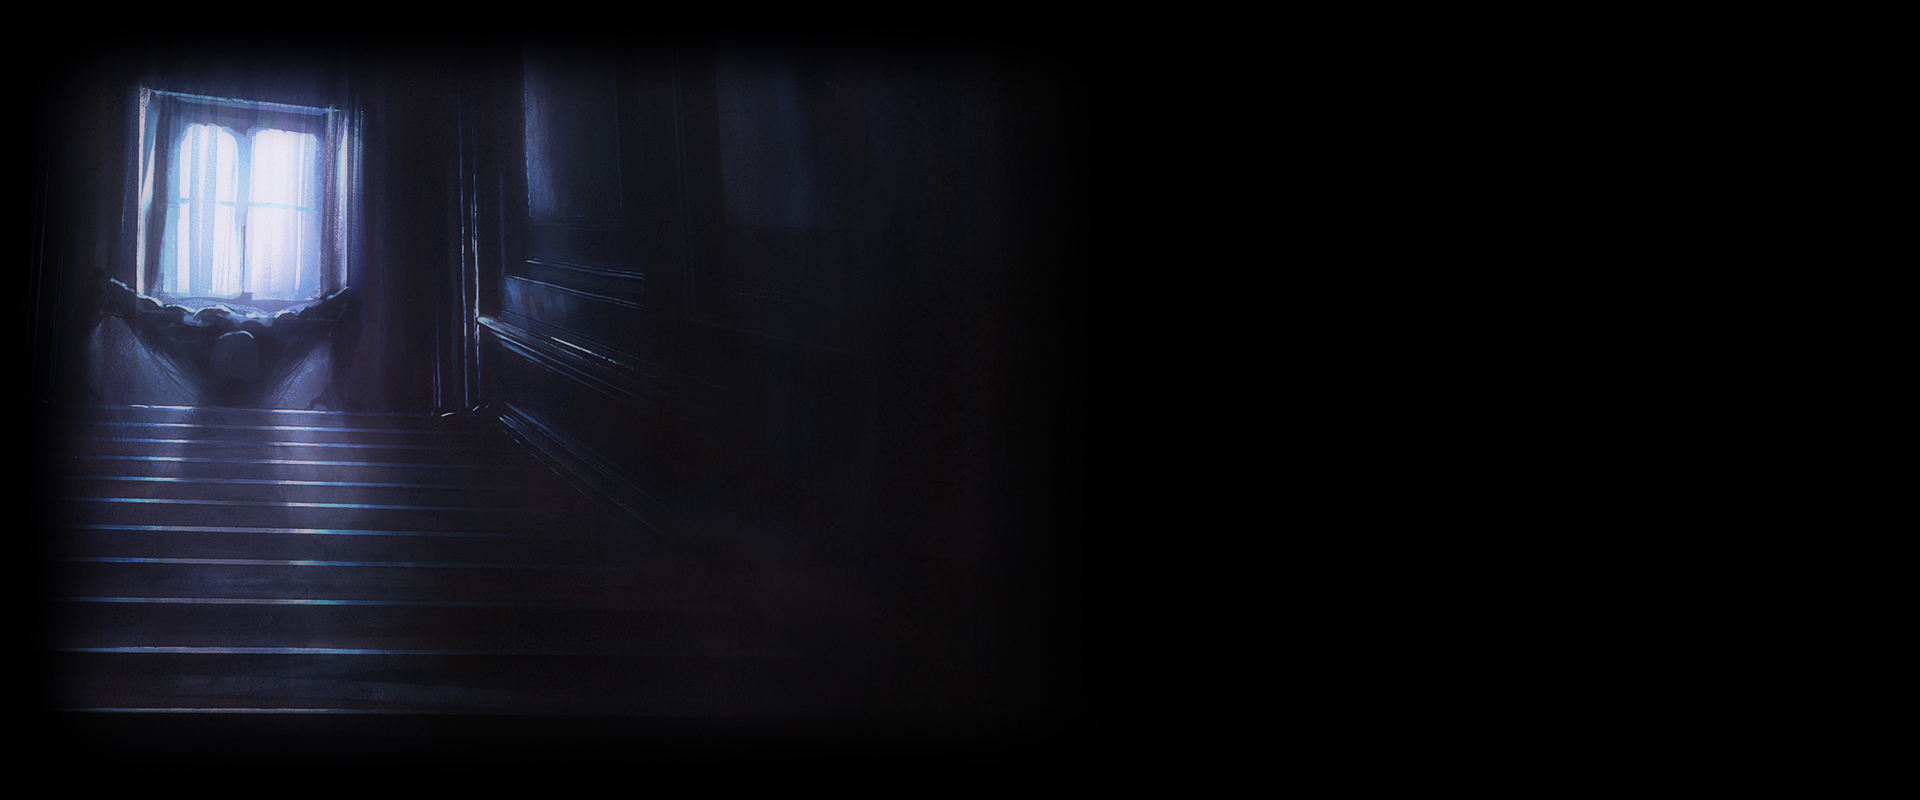  Murdered: Soul Suspect Windows Backgrounds